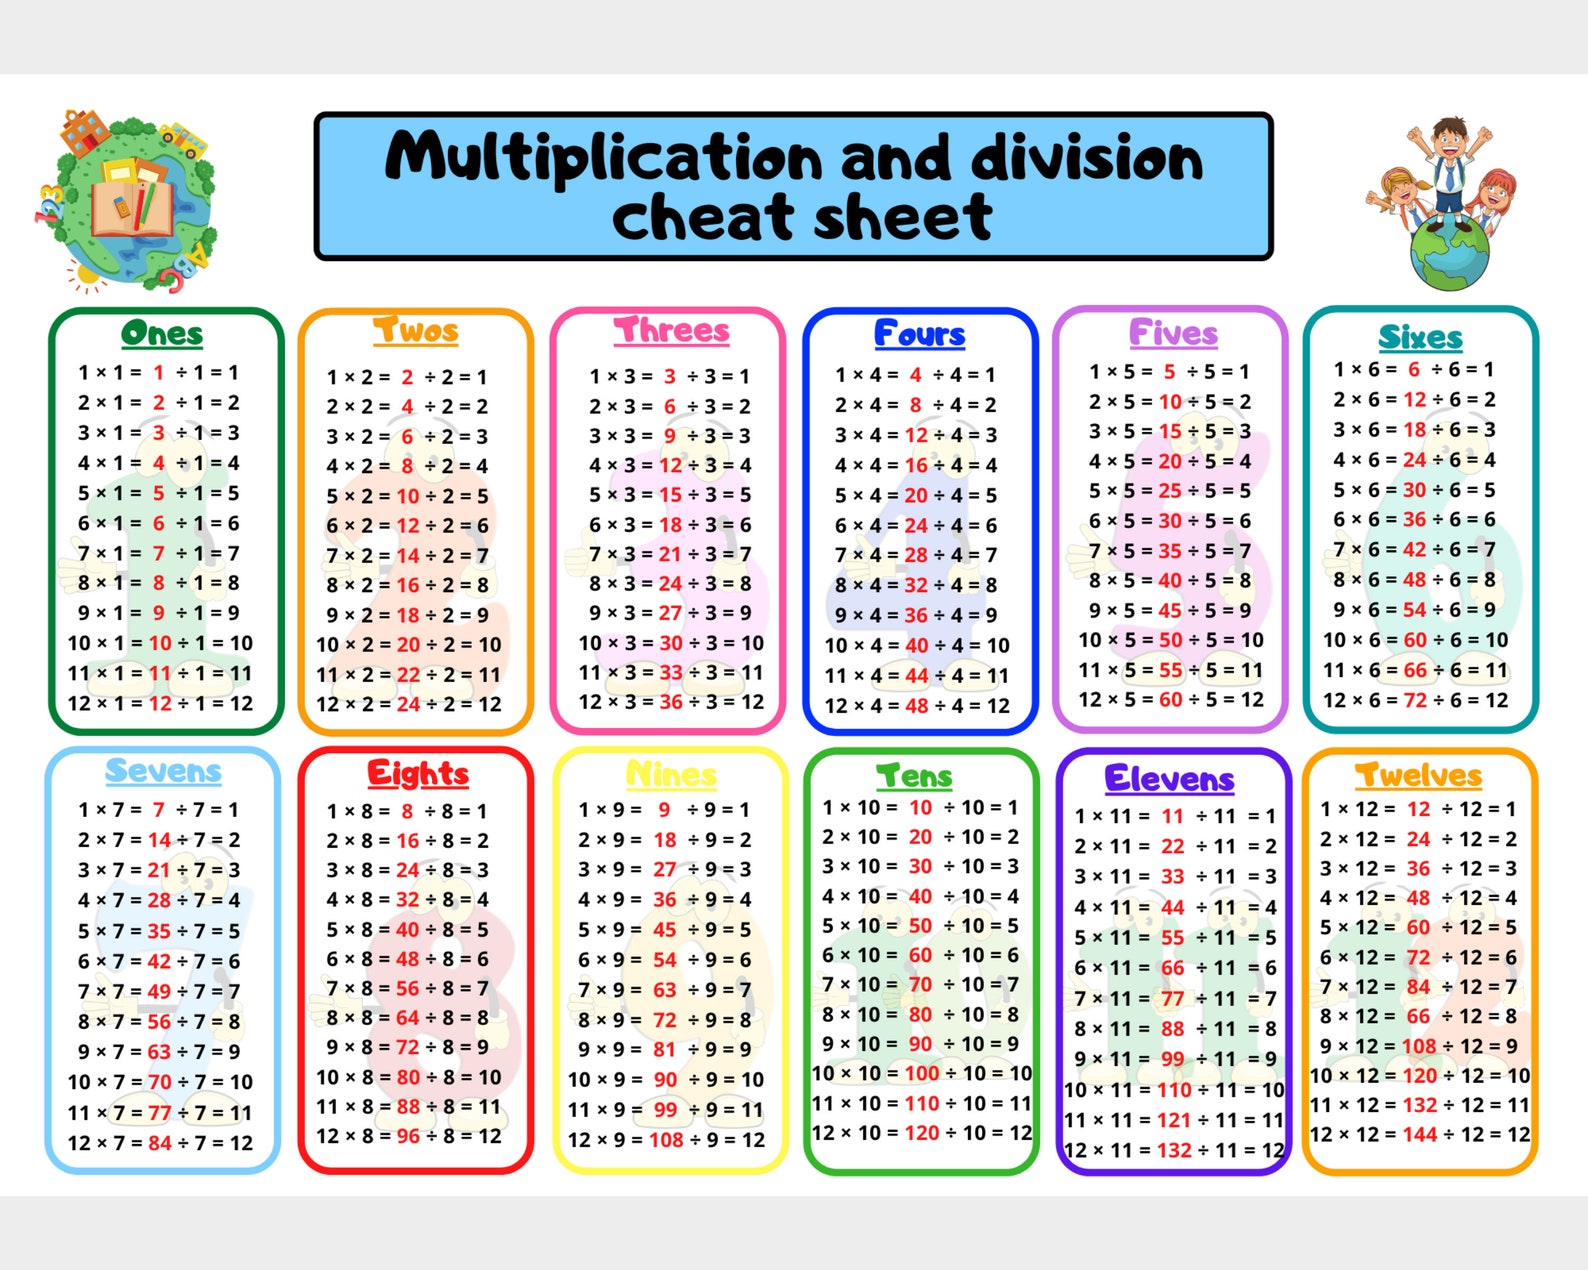 multiplication-table-grid-divisions-chart-times-tables-etsy